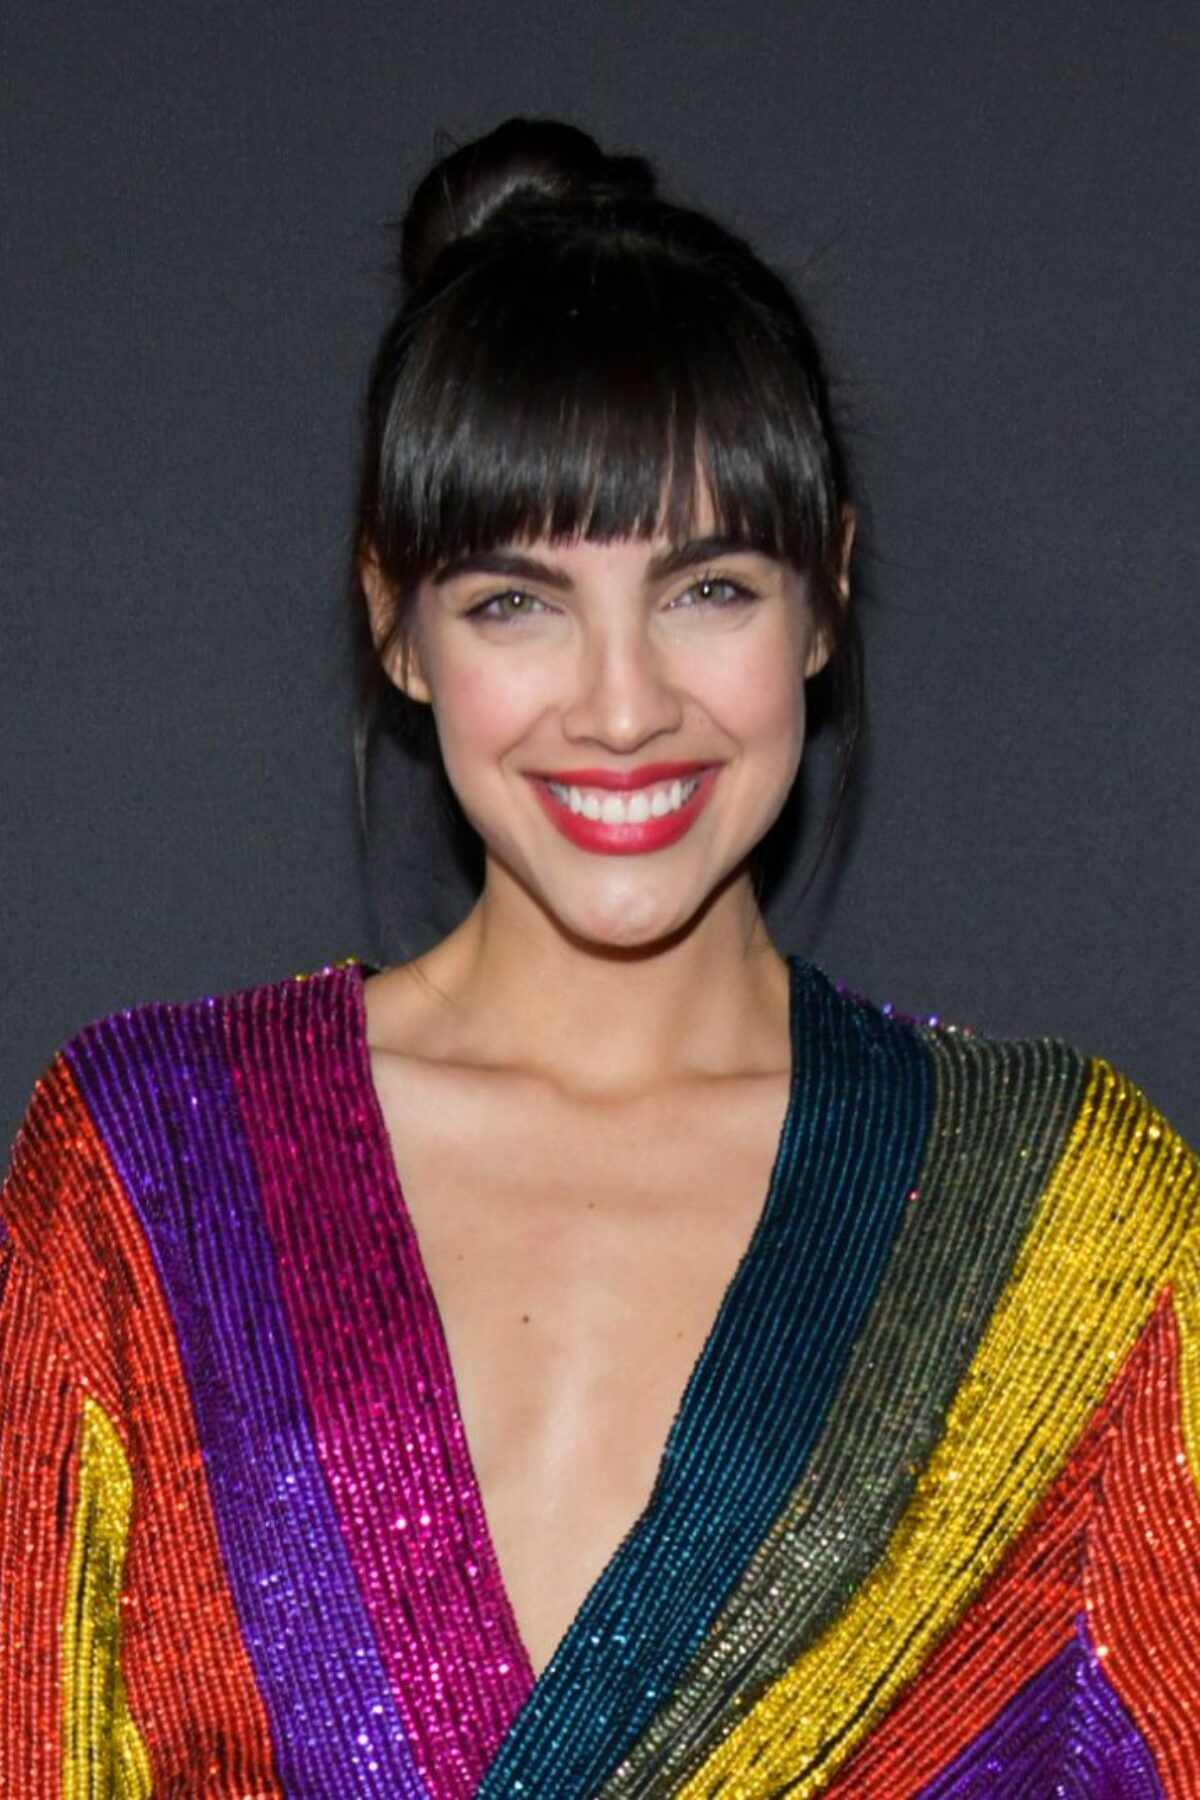 WEST HOLLYWOOD, CALIFORNIA - NOVEMBER 14: María Gabriela de Faría attends the HFPA and THR Golden Globe Ambassador Party at Catch LA on November 14, 2019 in West Hollywood, California. (Photo by Rodin Eckenroth/Getty Images)